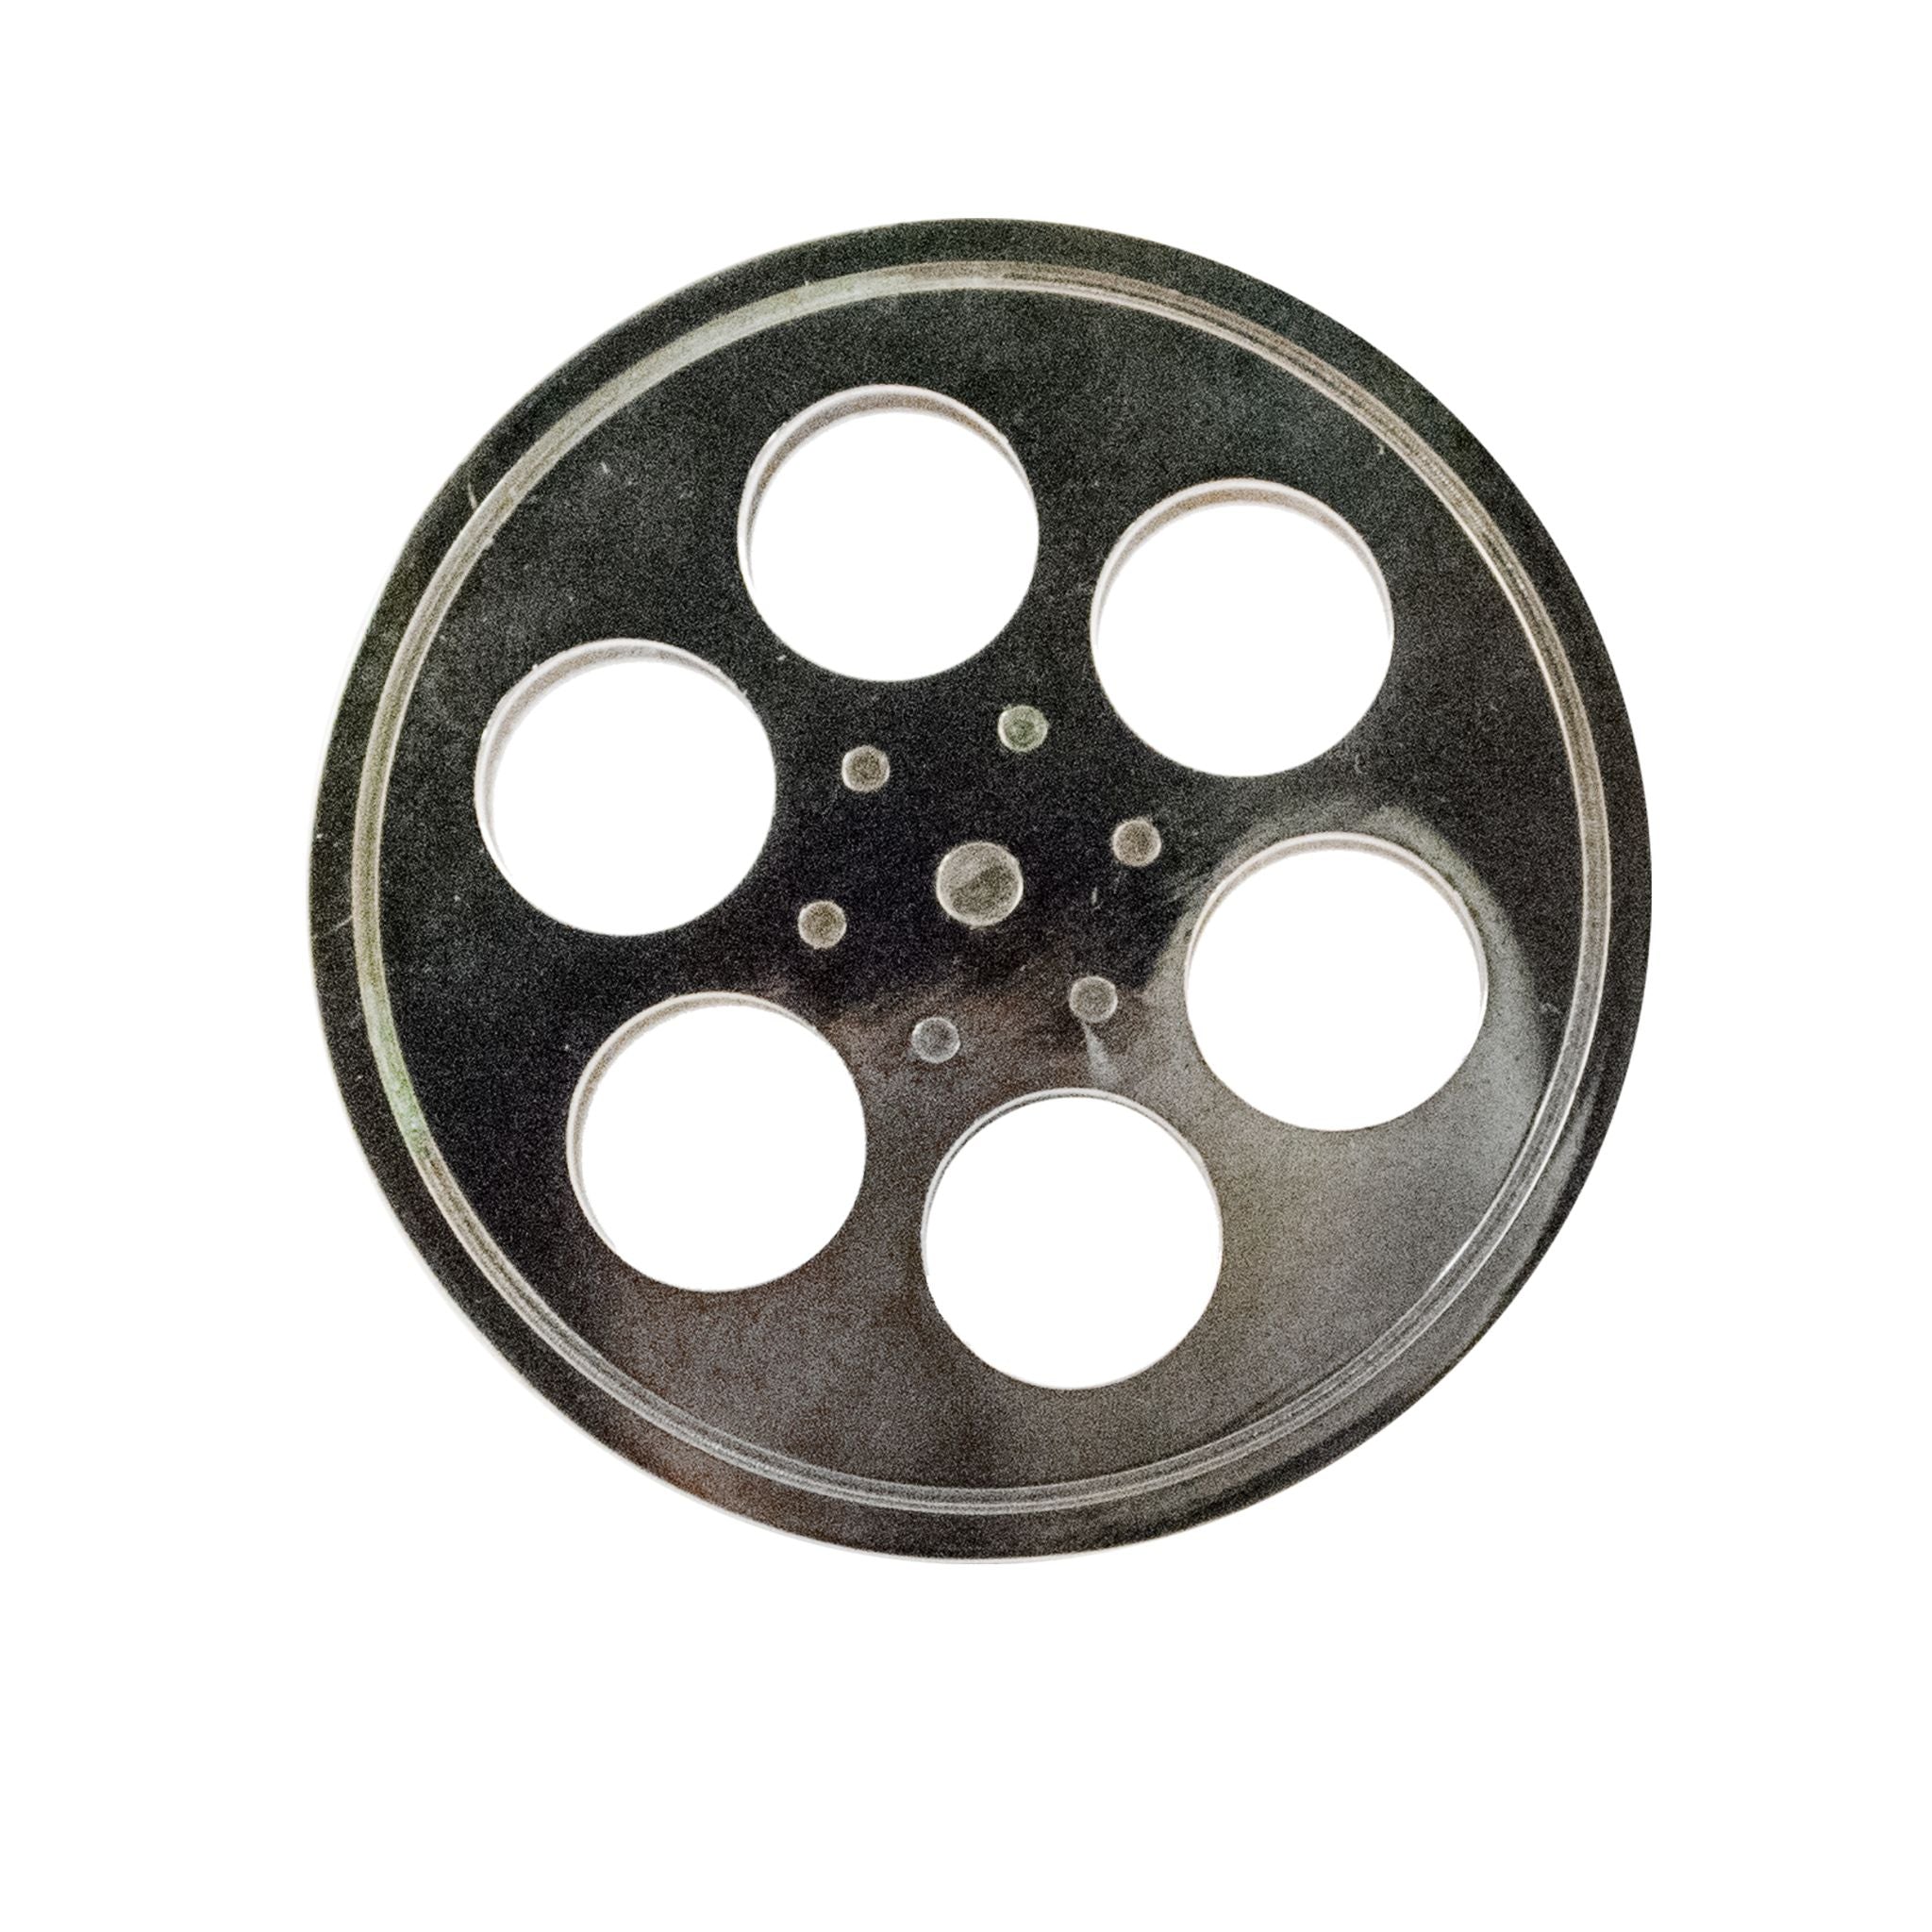 An image of a brass film reel-shaped knob against a neutral background. The knob features intricate detailing resembling a cinematic film reel, adding a touch of nostalgia and creativity to furniture or drawers.